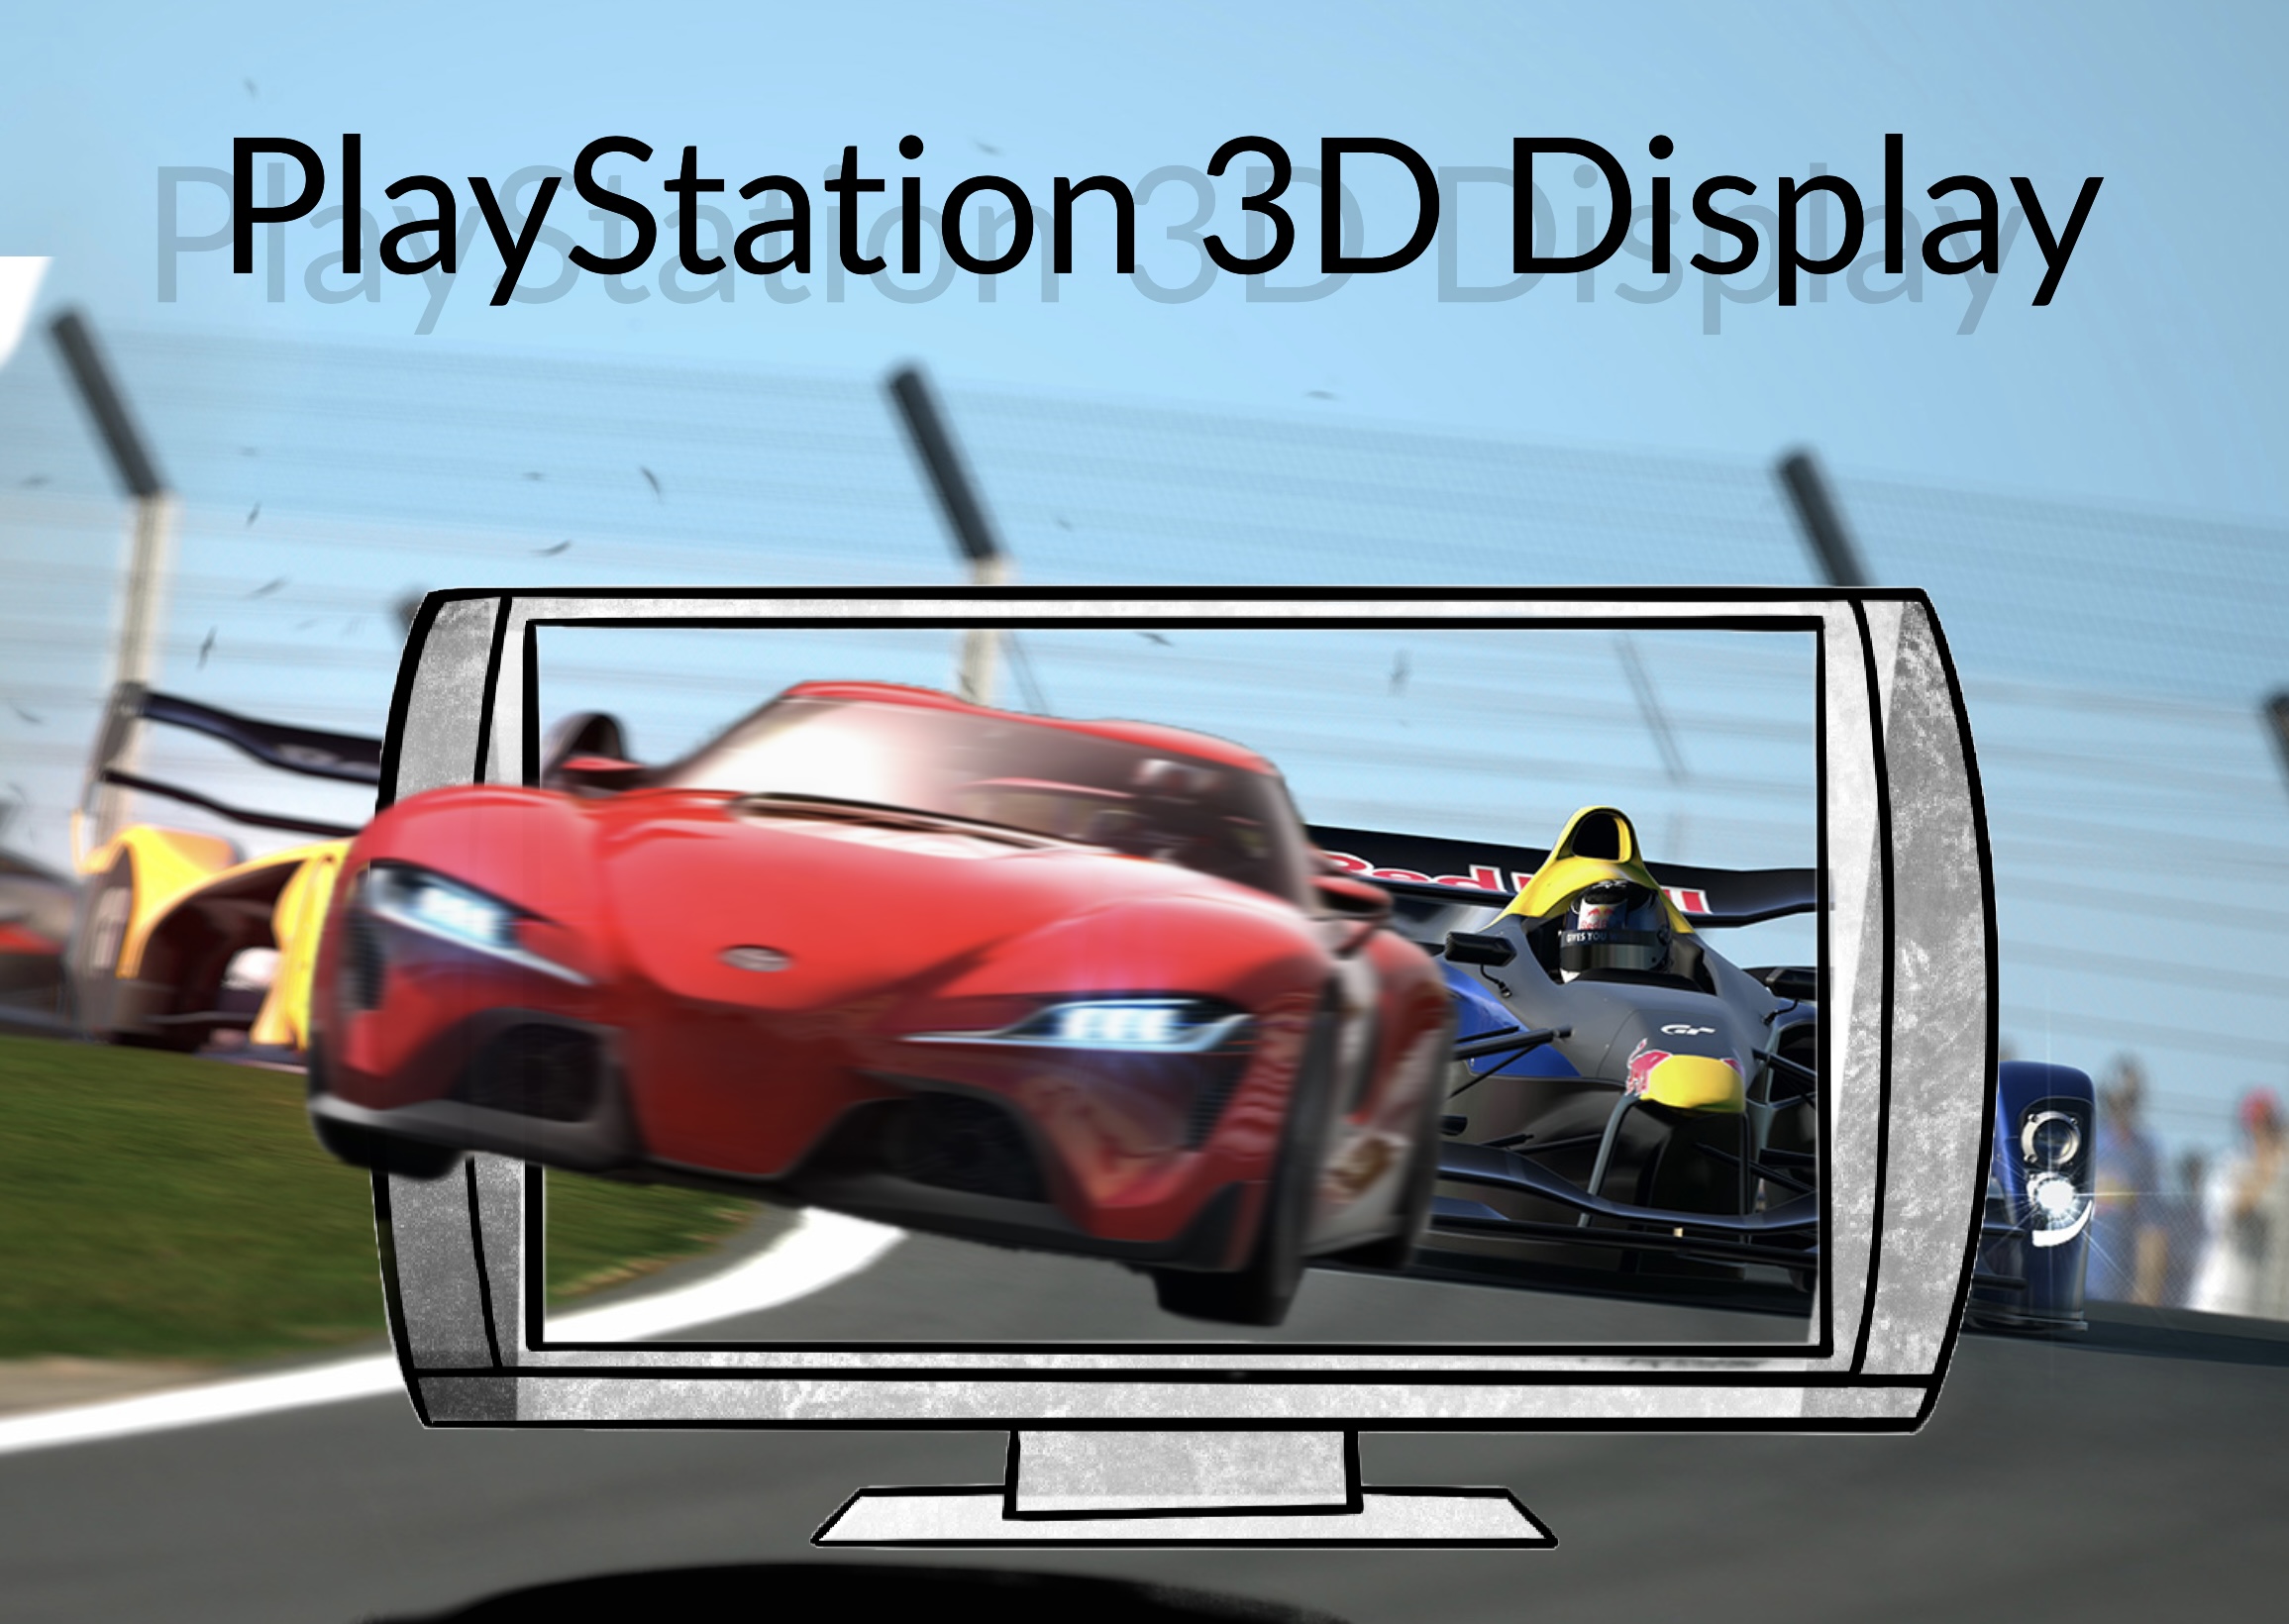 PlayStation 3D Display Overview and Buying Guide